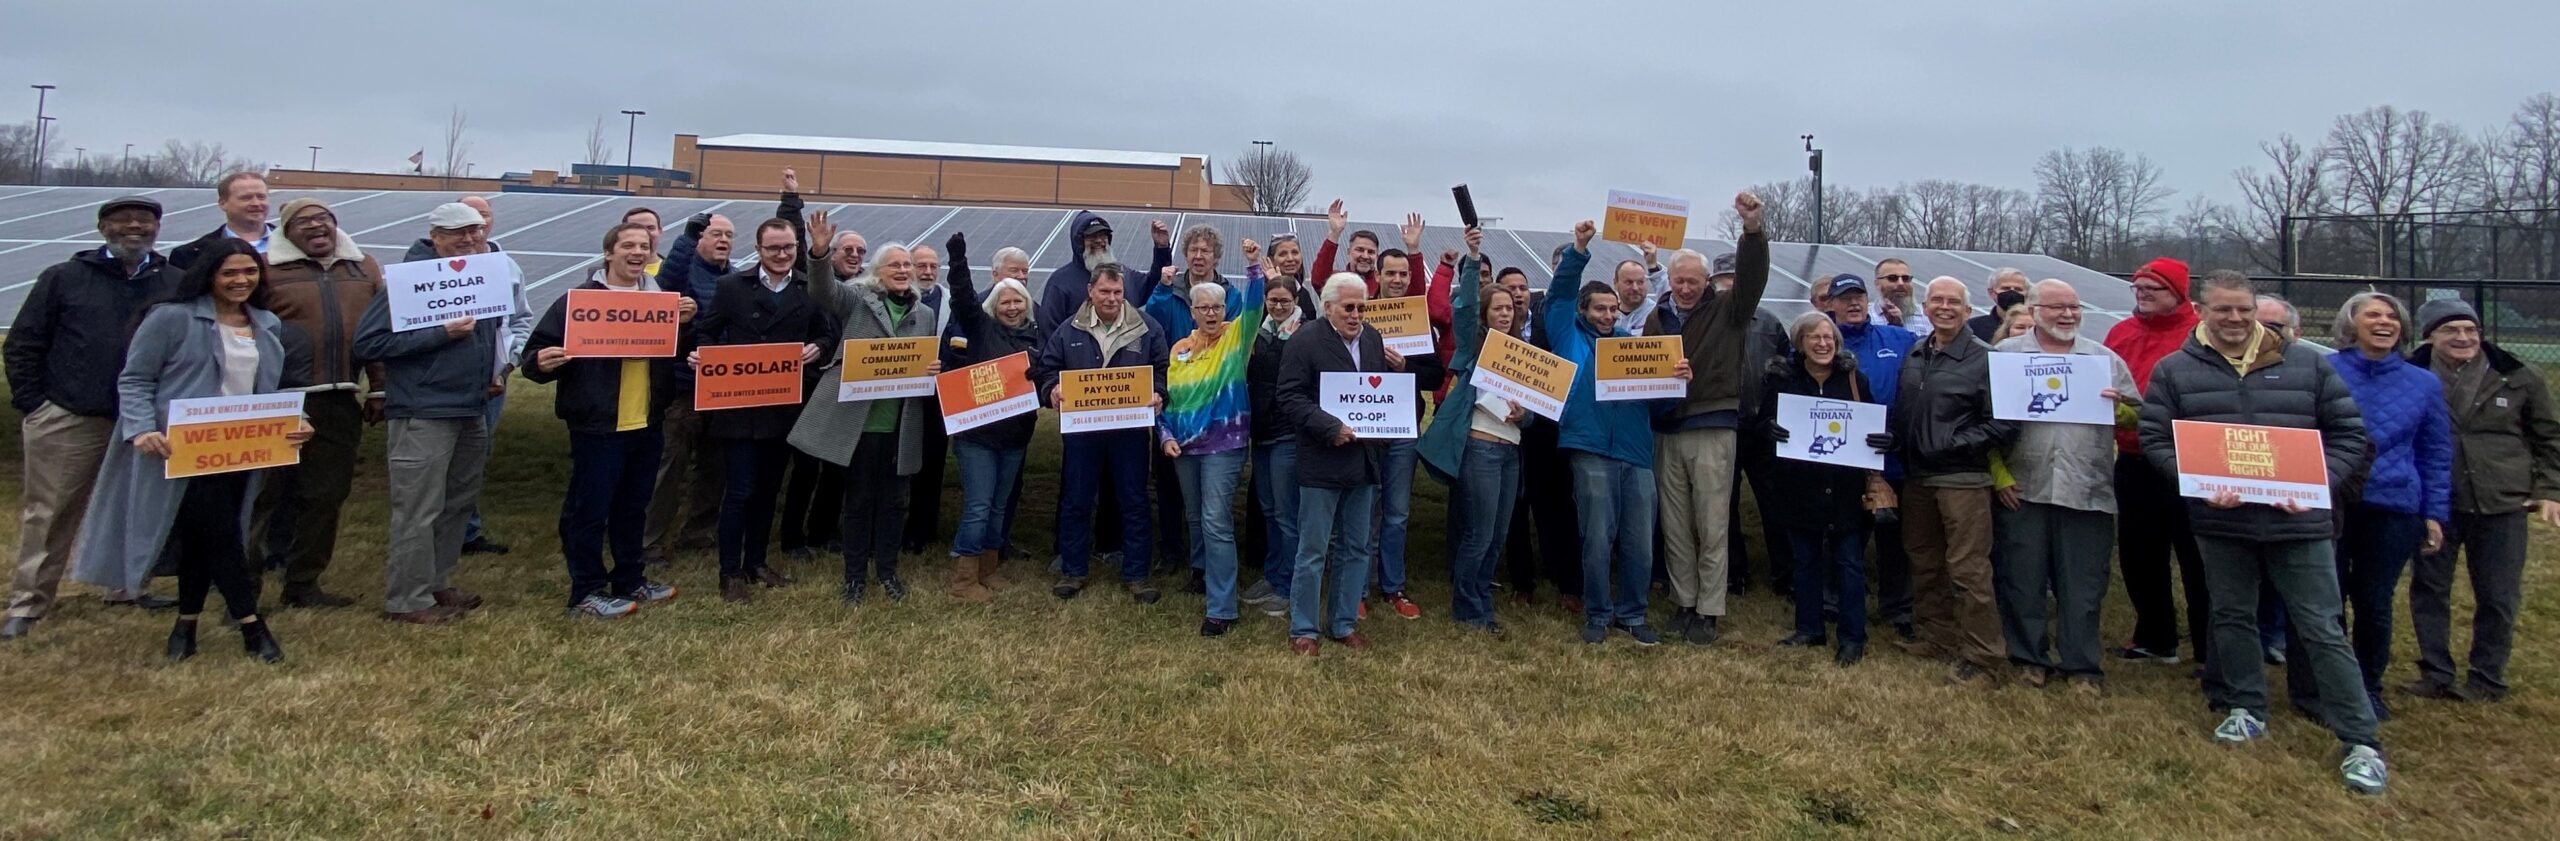 Indiana residents rallying for solar energy incentives before the state phased out its net metering policy that helped more Hoosiers go solar